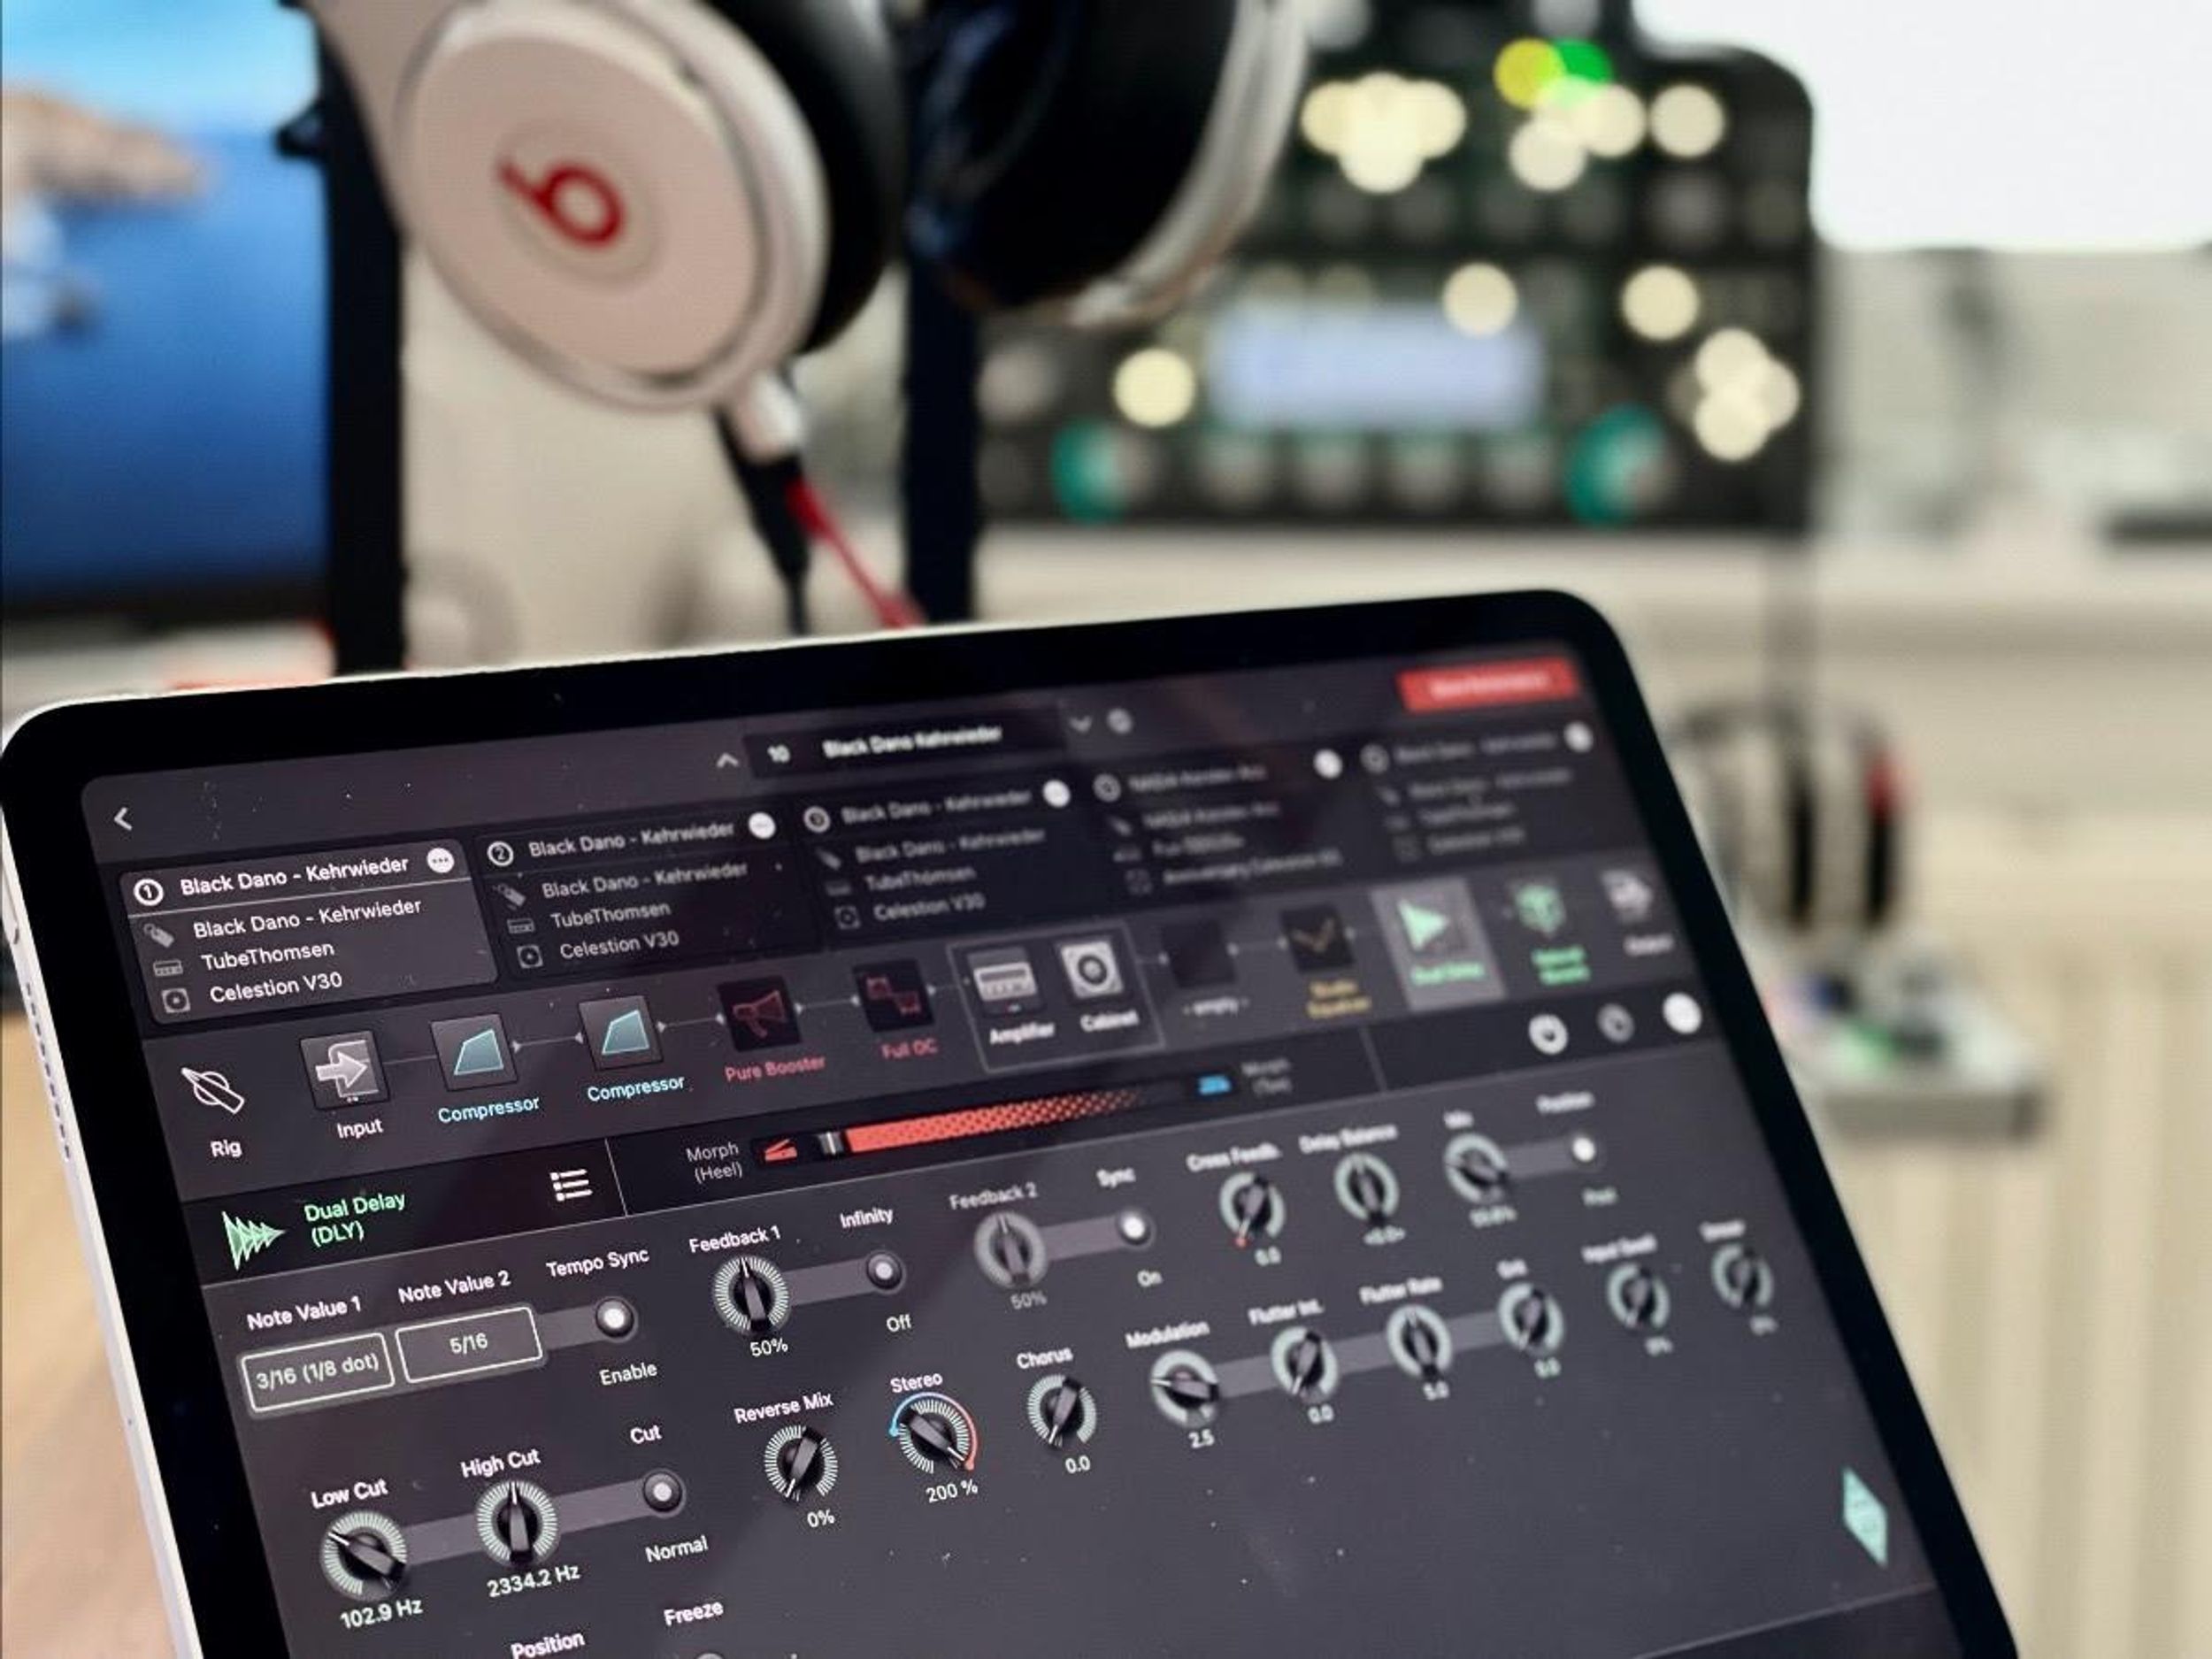 Kemper Releases Rig Editor for iPad